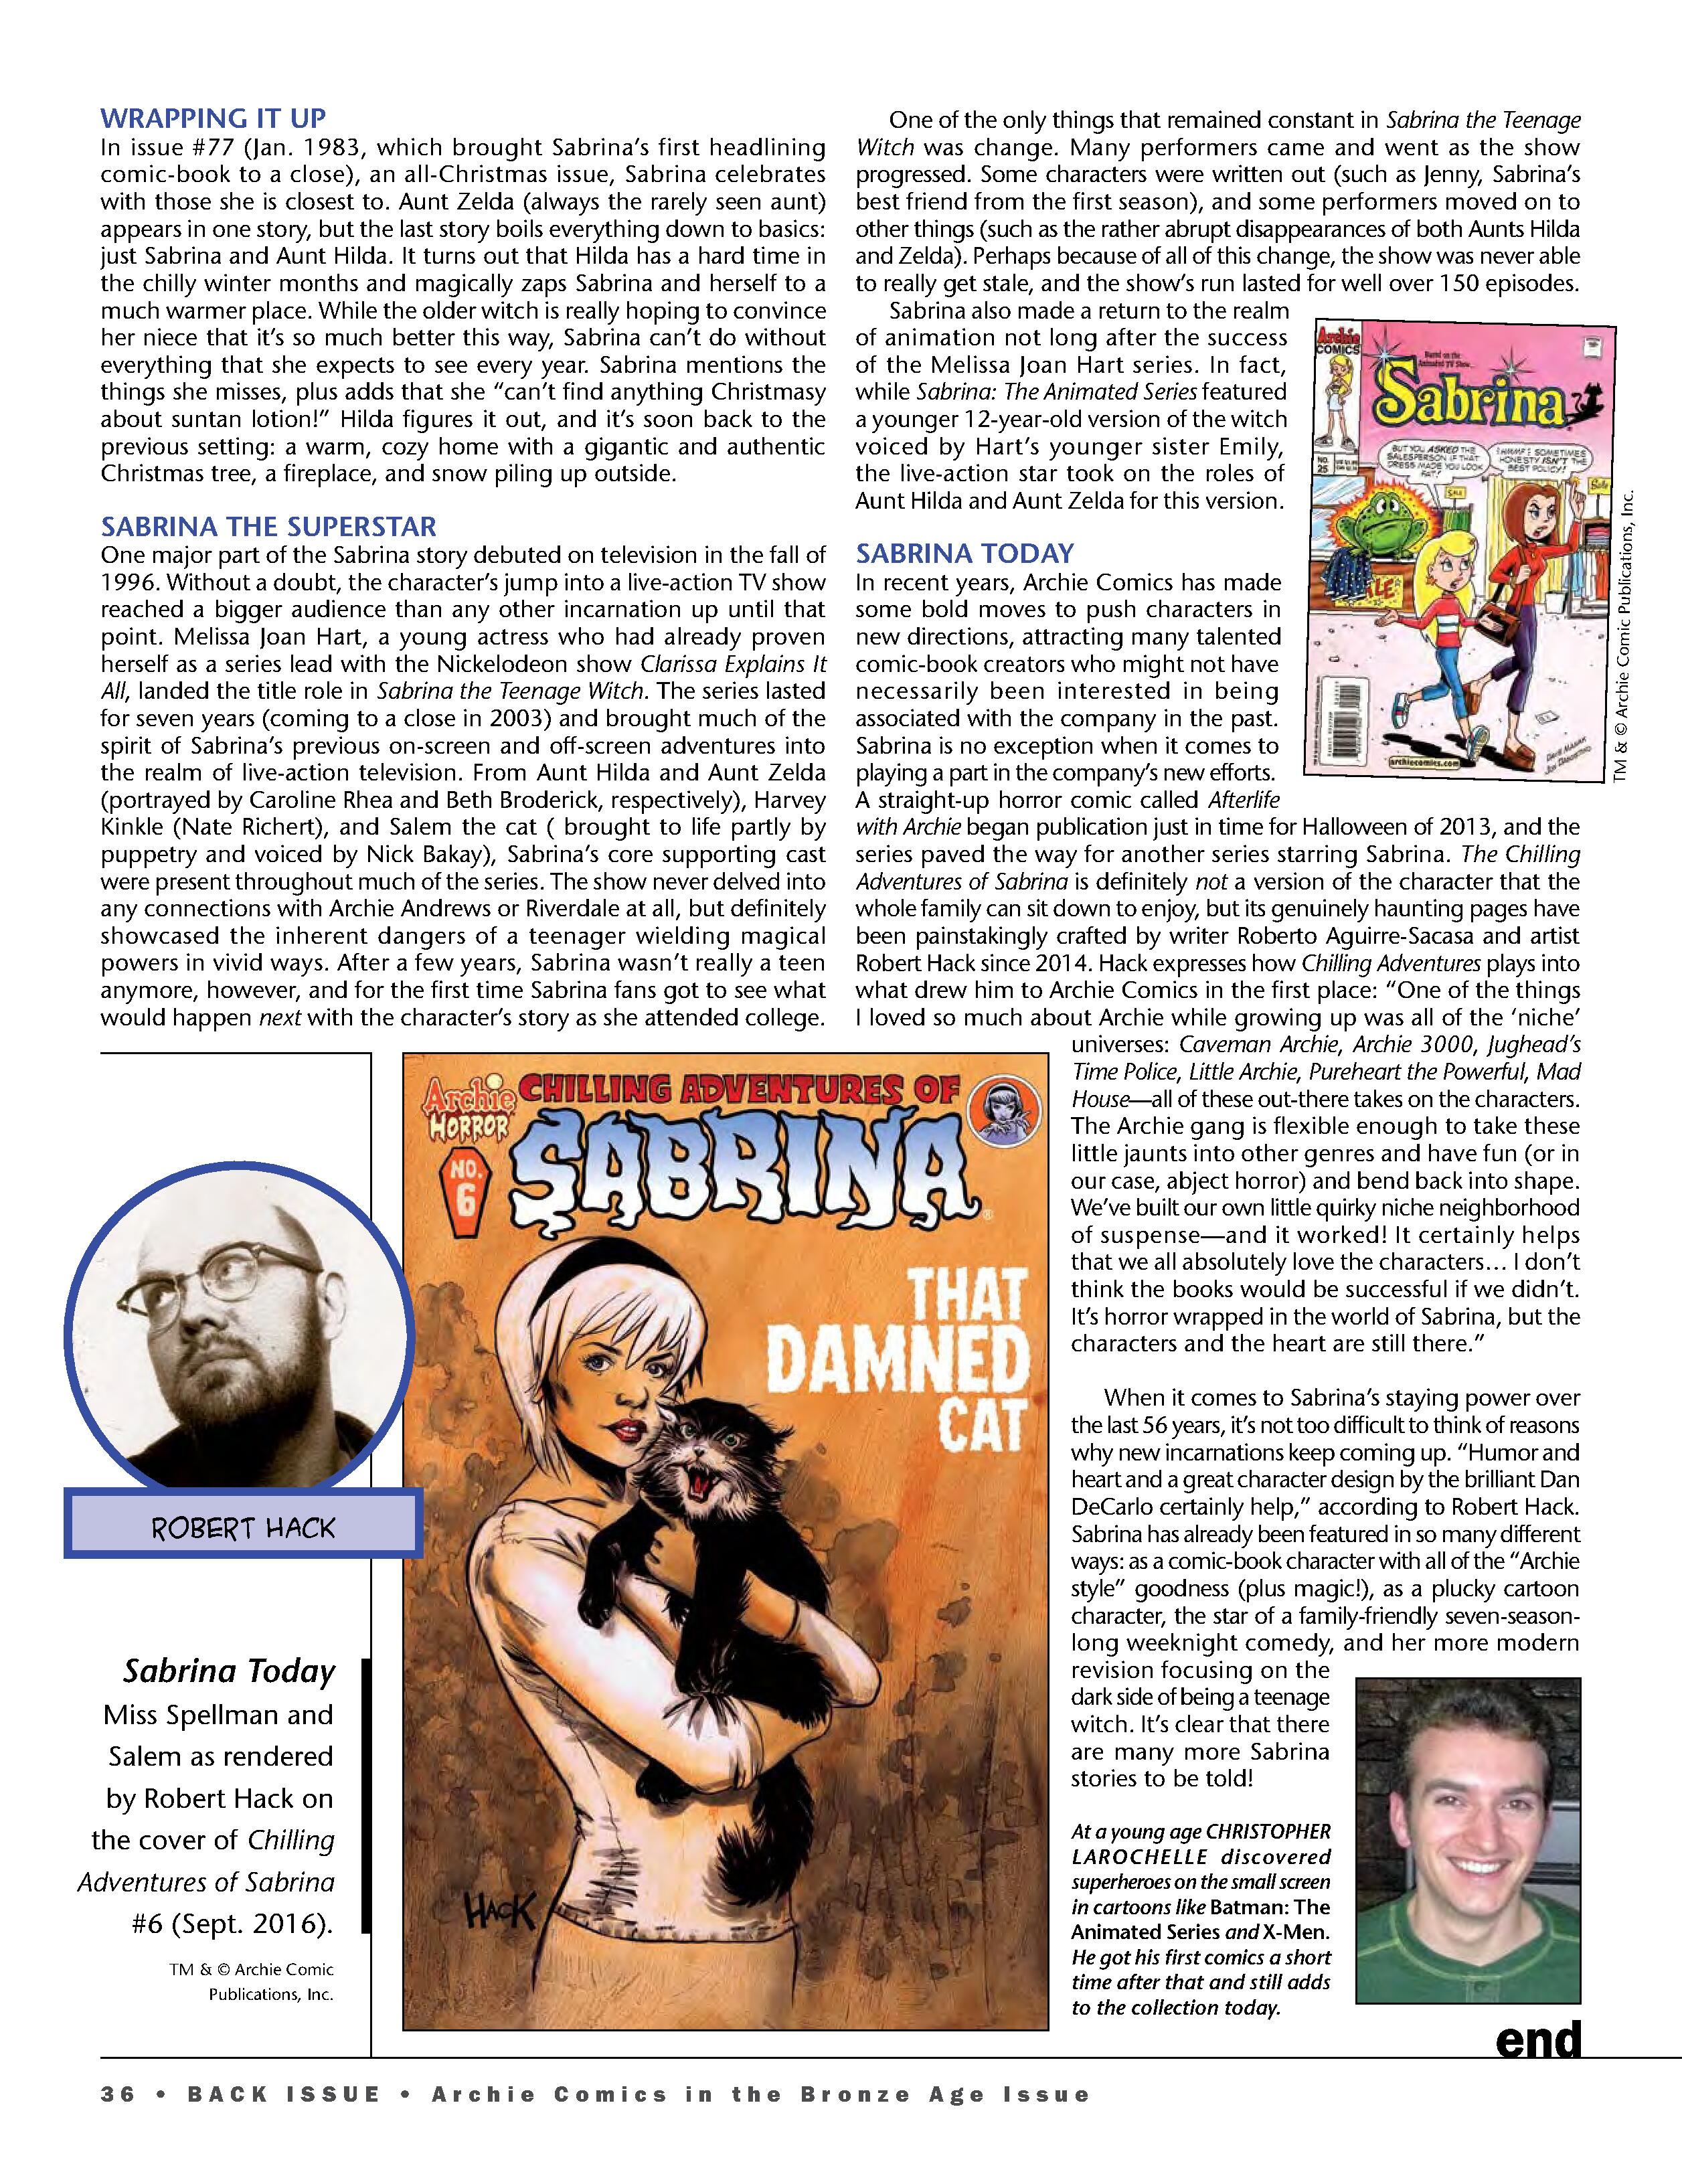 Read online Back Issue comic -  Issue #107 - 38